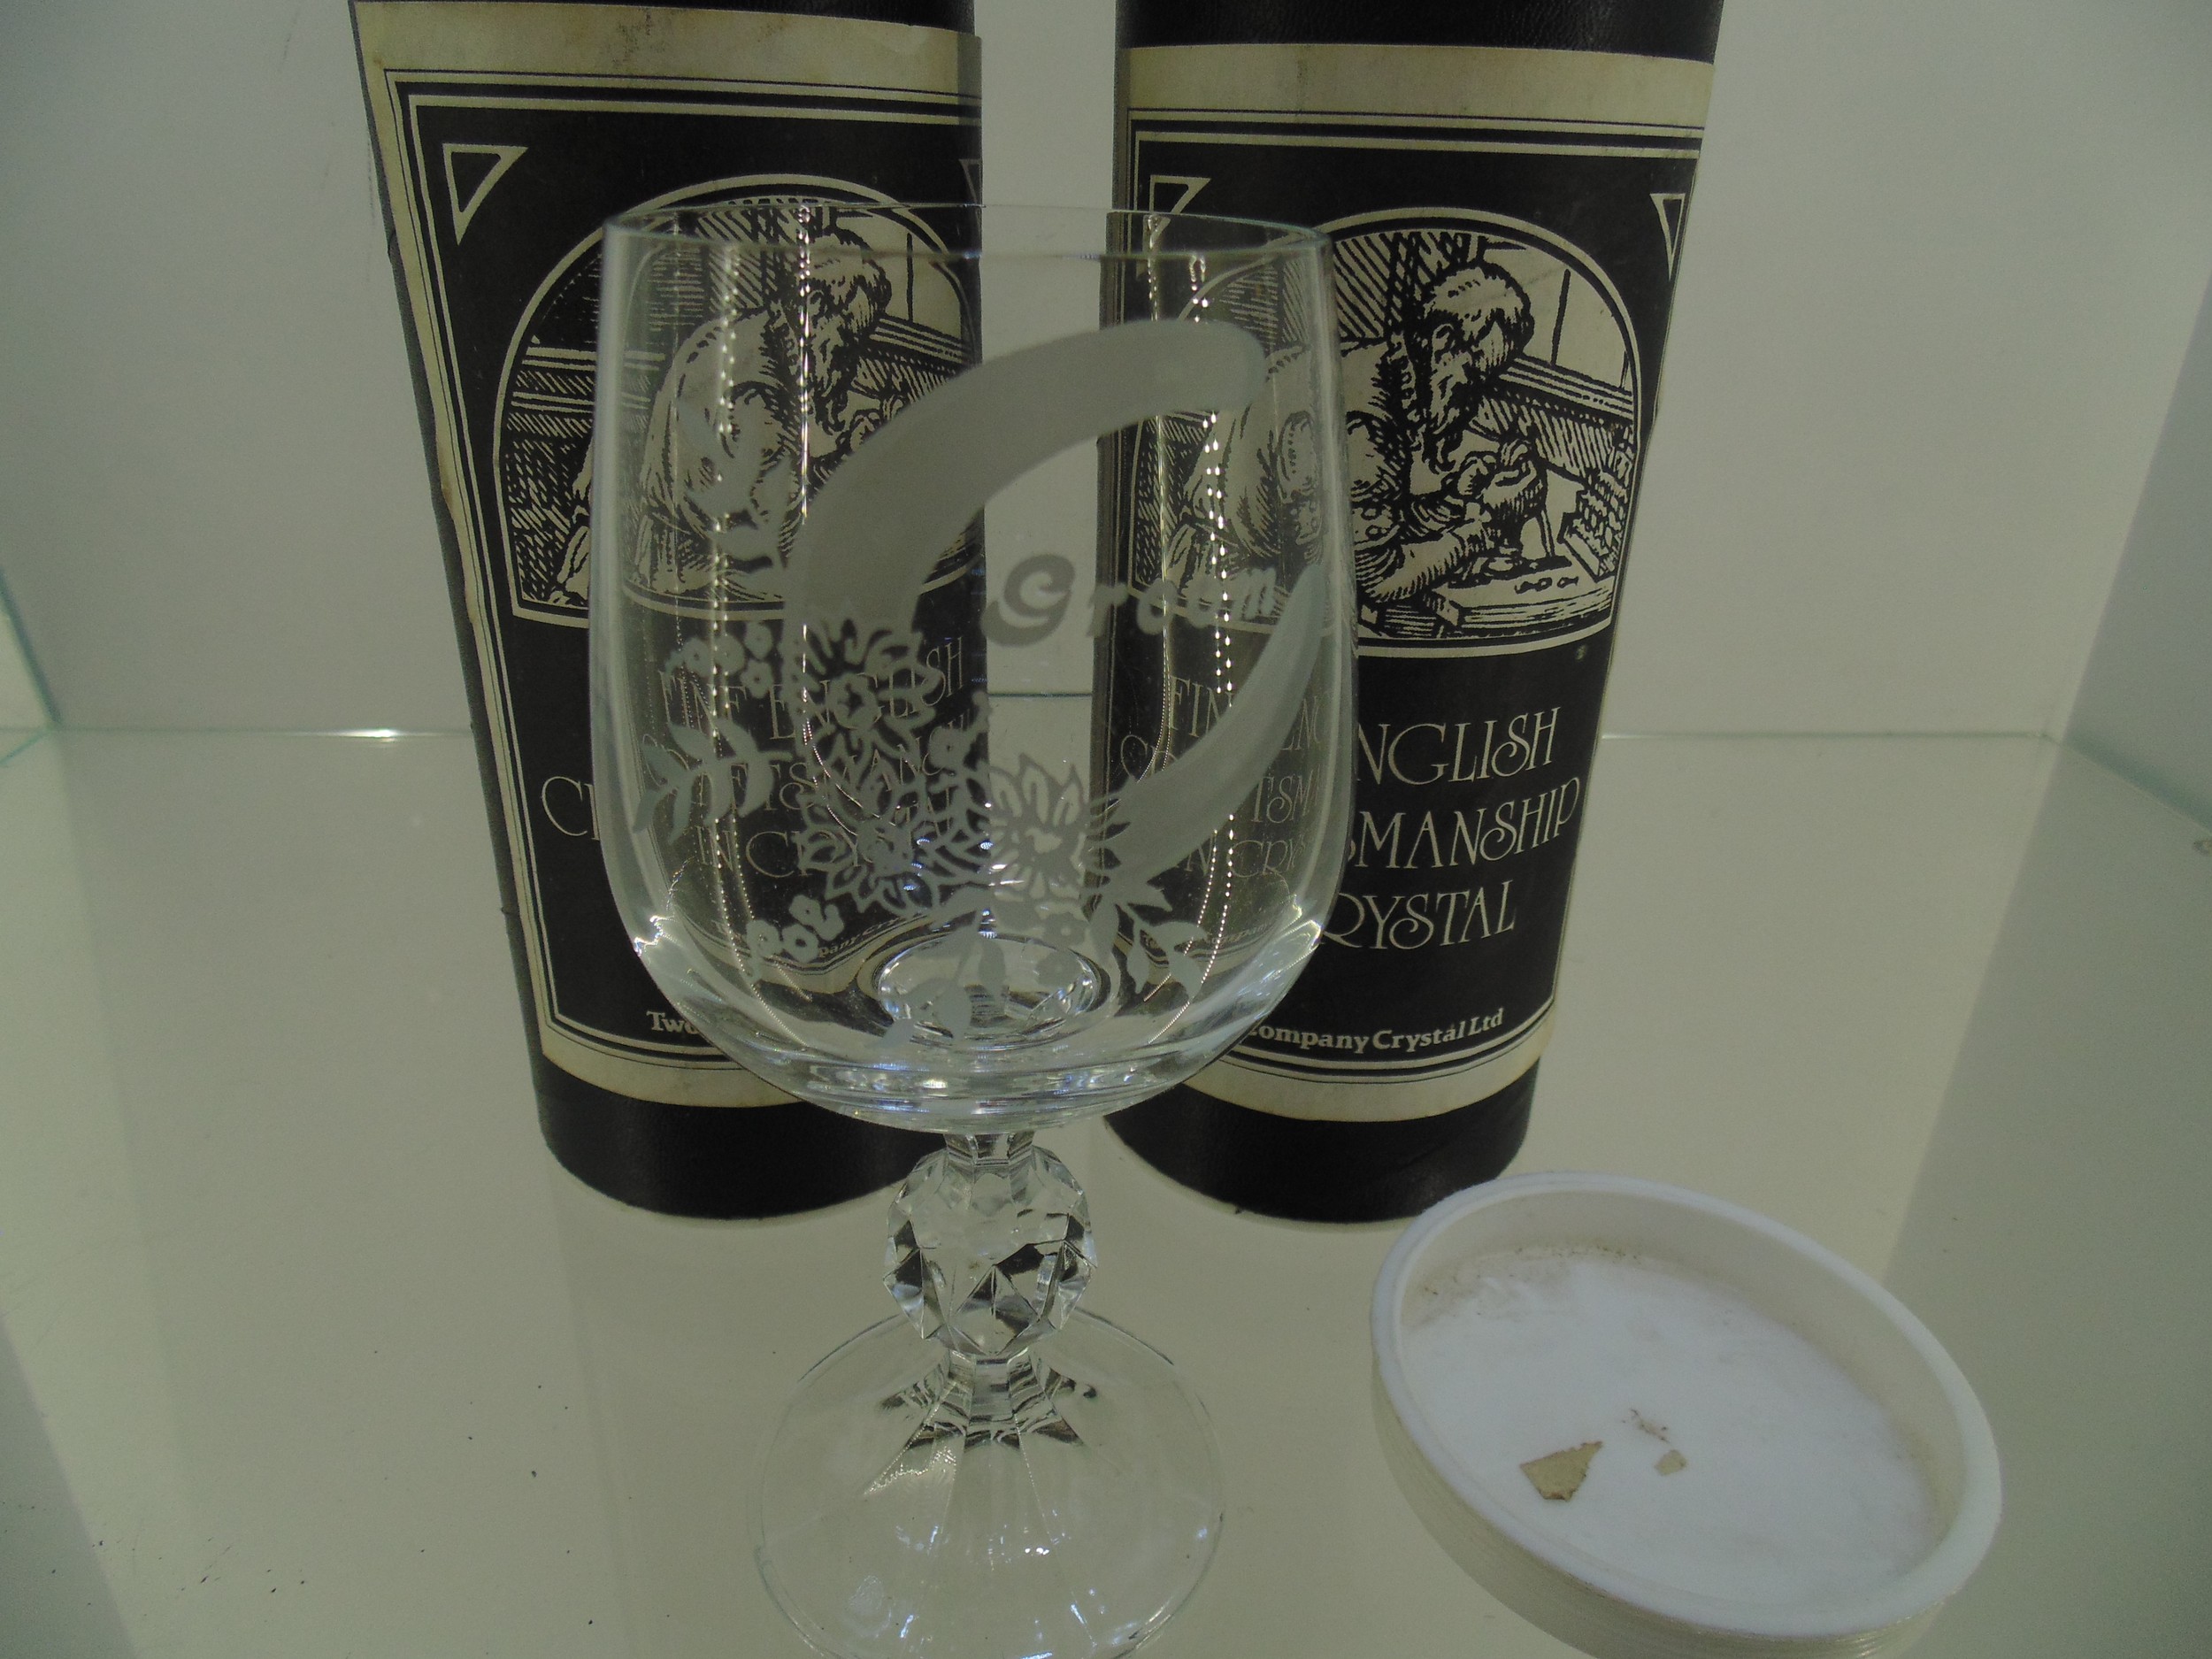 Fine English Wine Glasses With Bride and Groom - Image 3 of 3